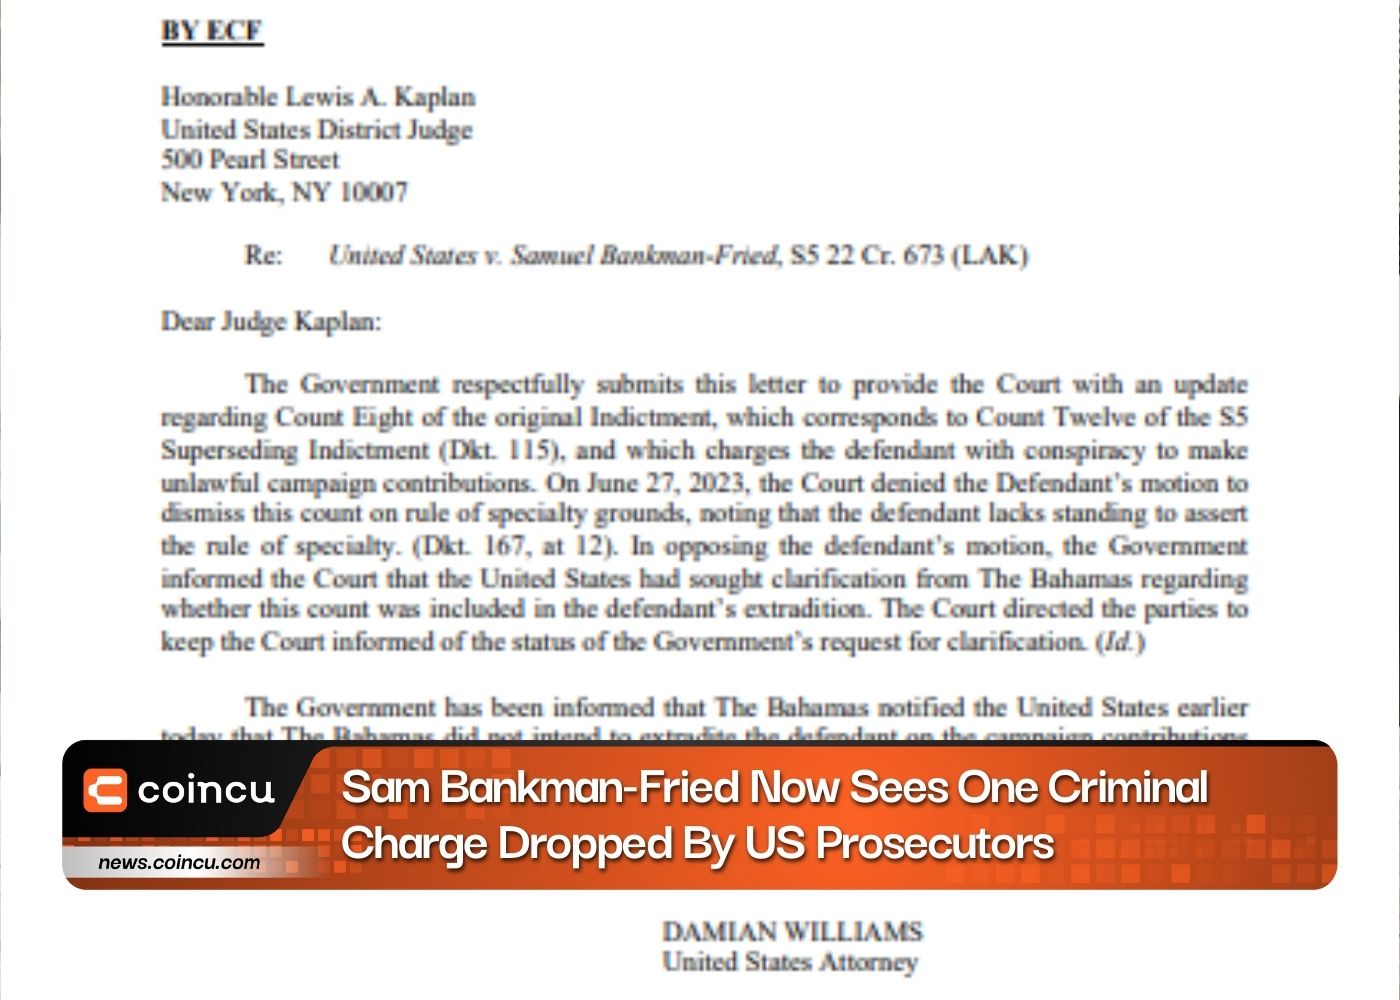 Sam Bankman-Fried Now Sees One Criminal Charge Dropped By US Prosecutors